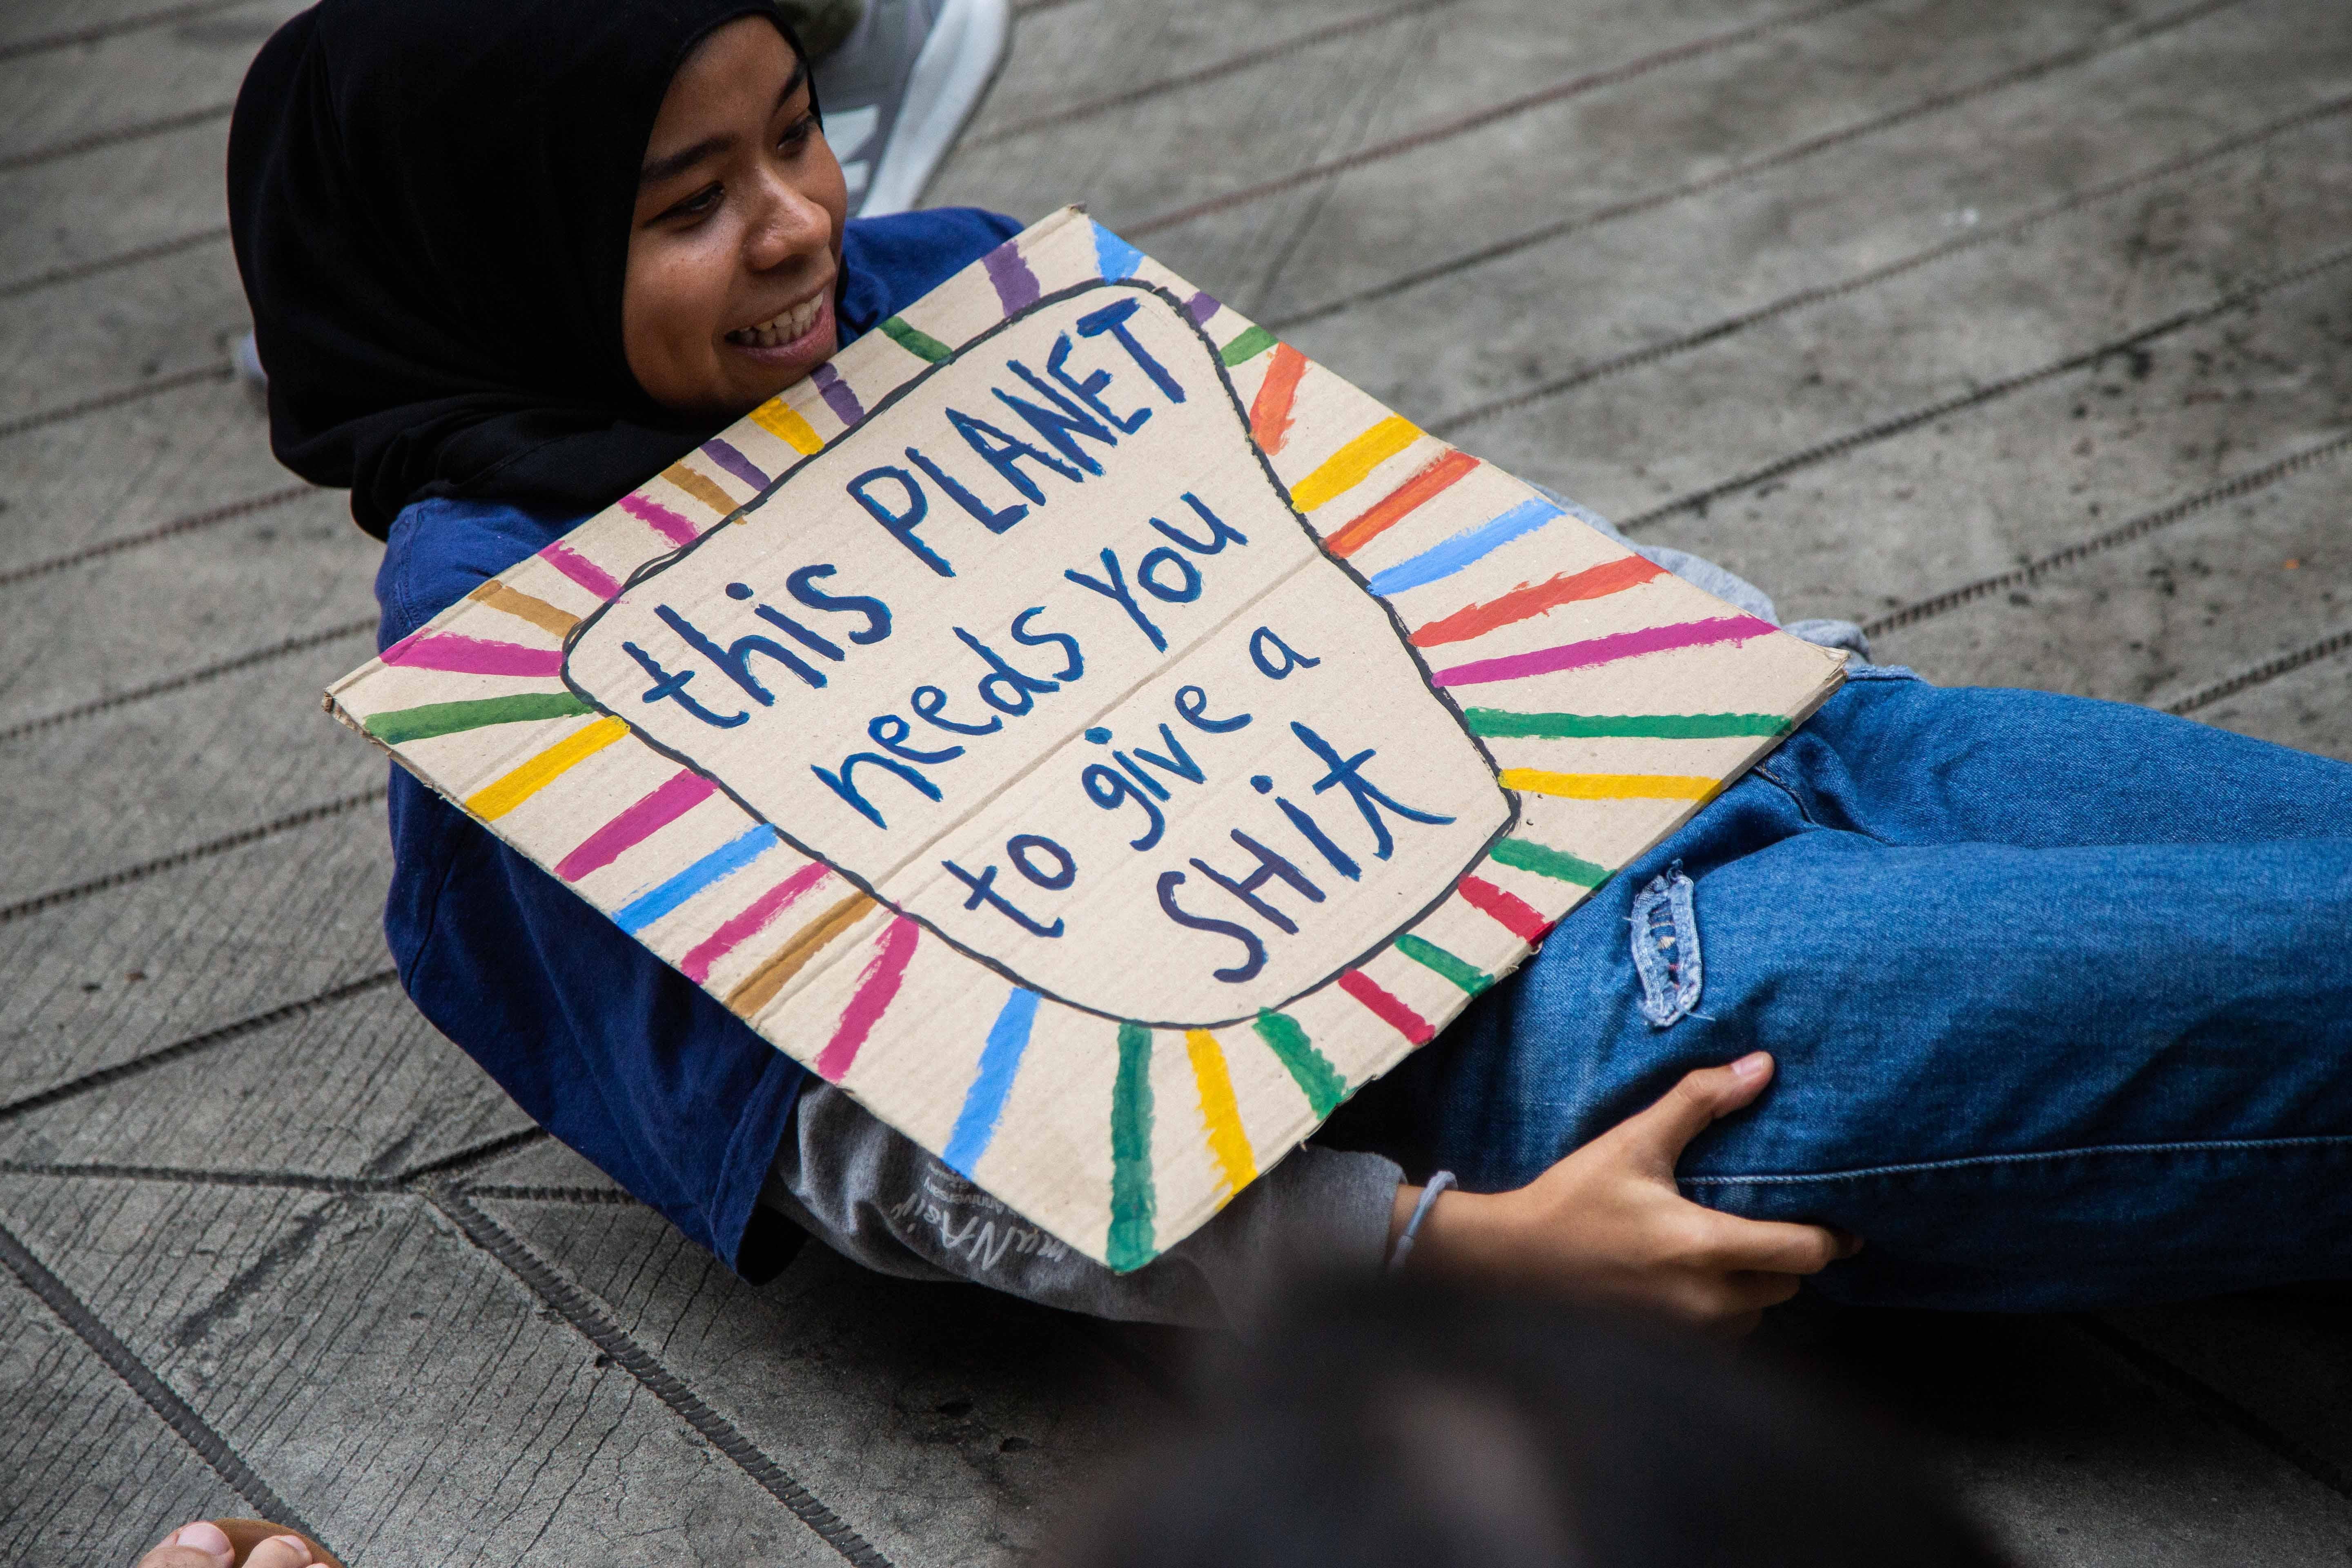 A girl holds a sign that says "this planet needs you to give a shit."